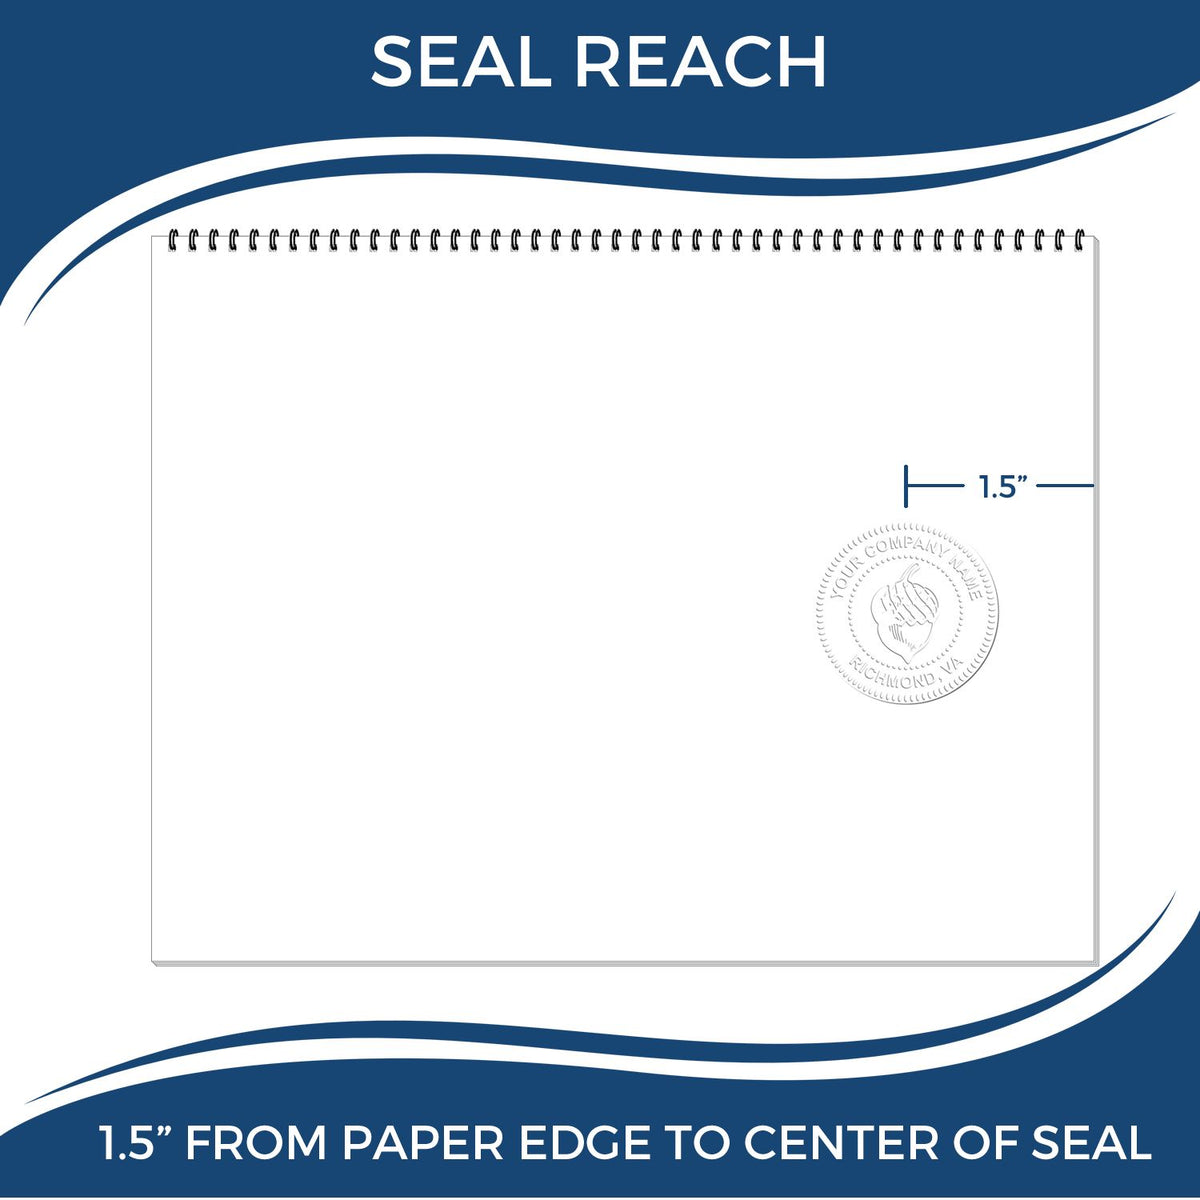 An infographic showing the seal reach which is represented by a ruler and a miniature seal image of the Gift Ohio Landscape Architect Seal